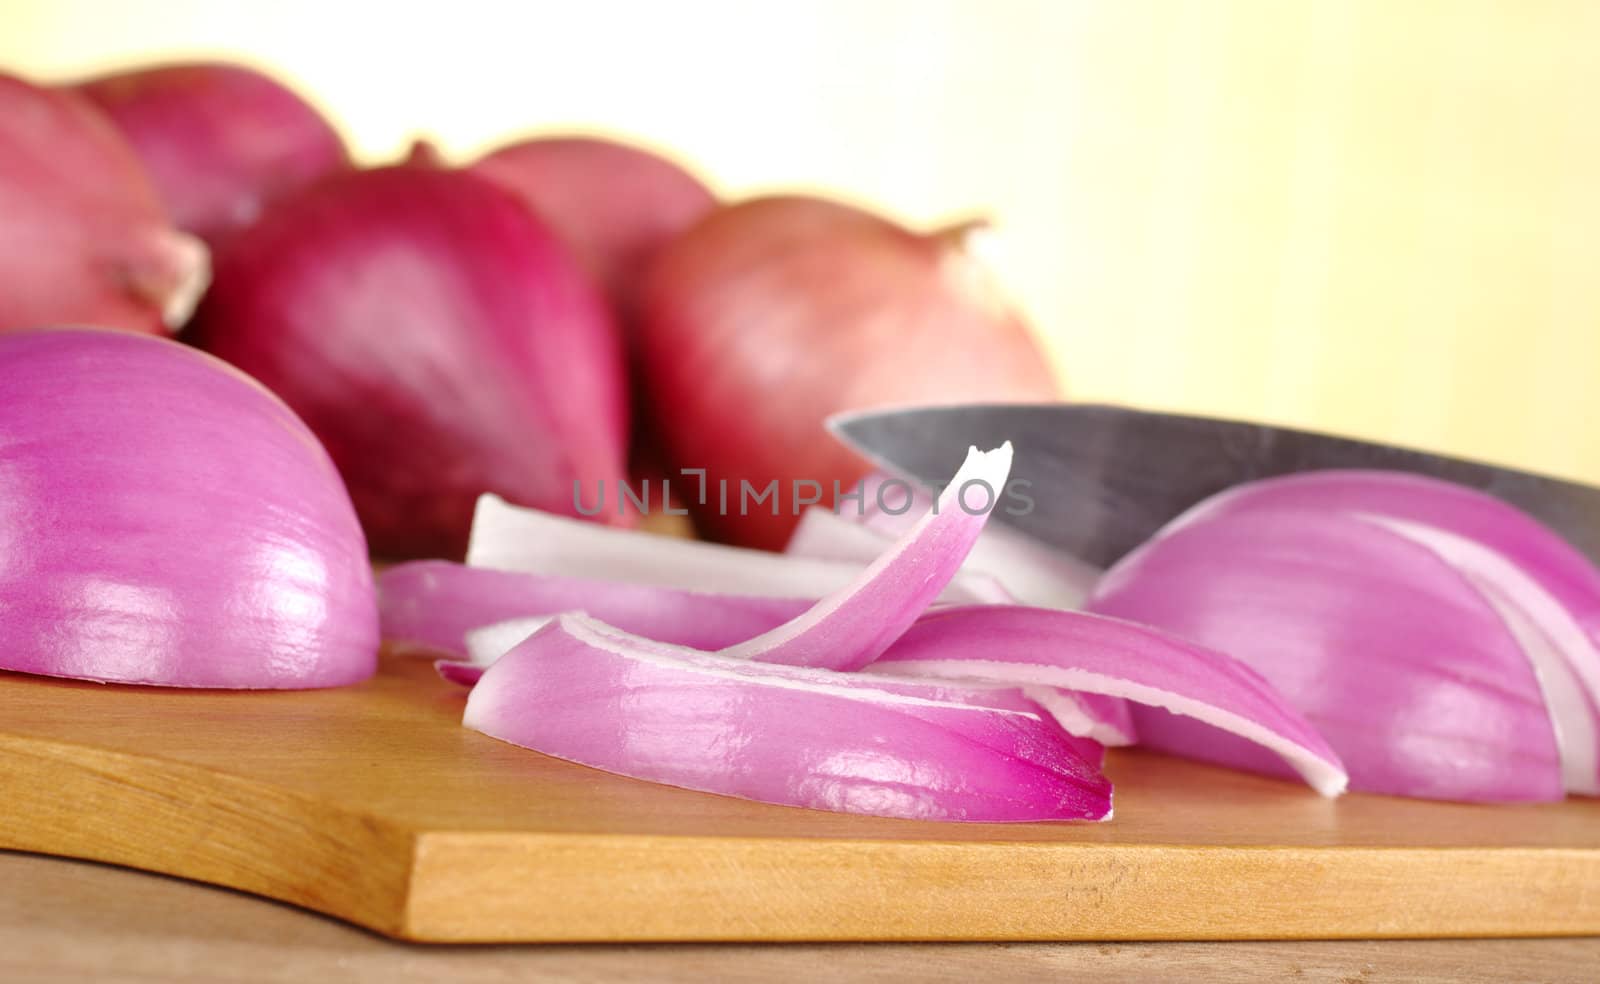 Cutting red onions on wooden cutting board (Selective Focus, Focus on the onion slices in the front)